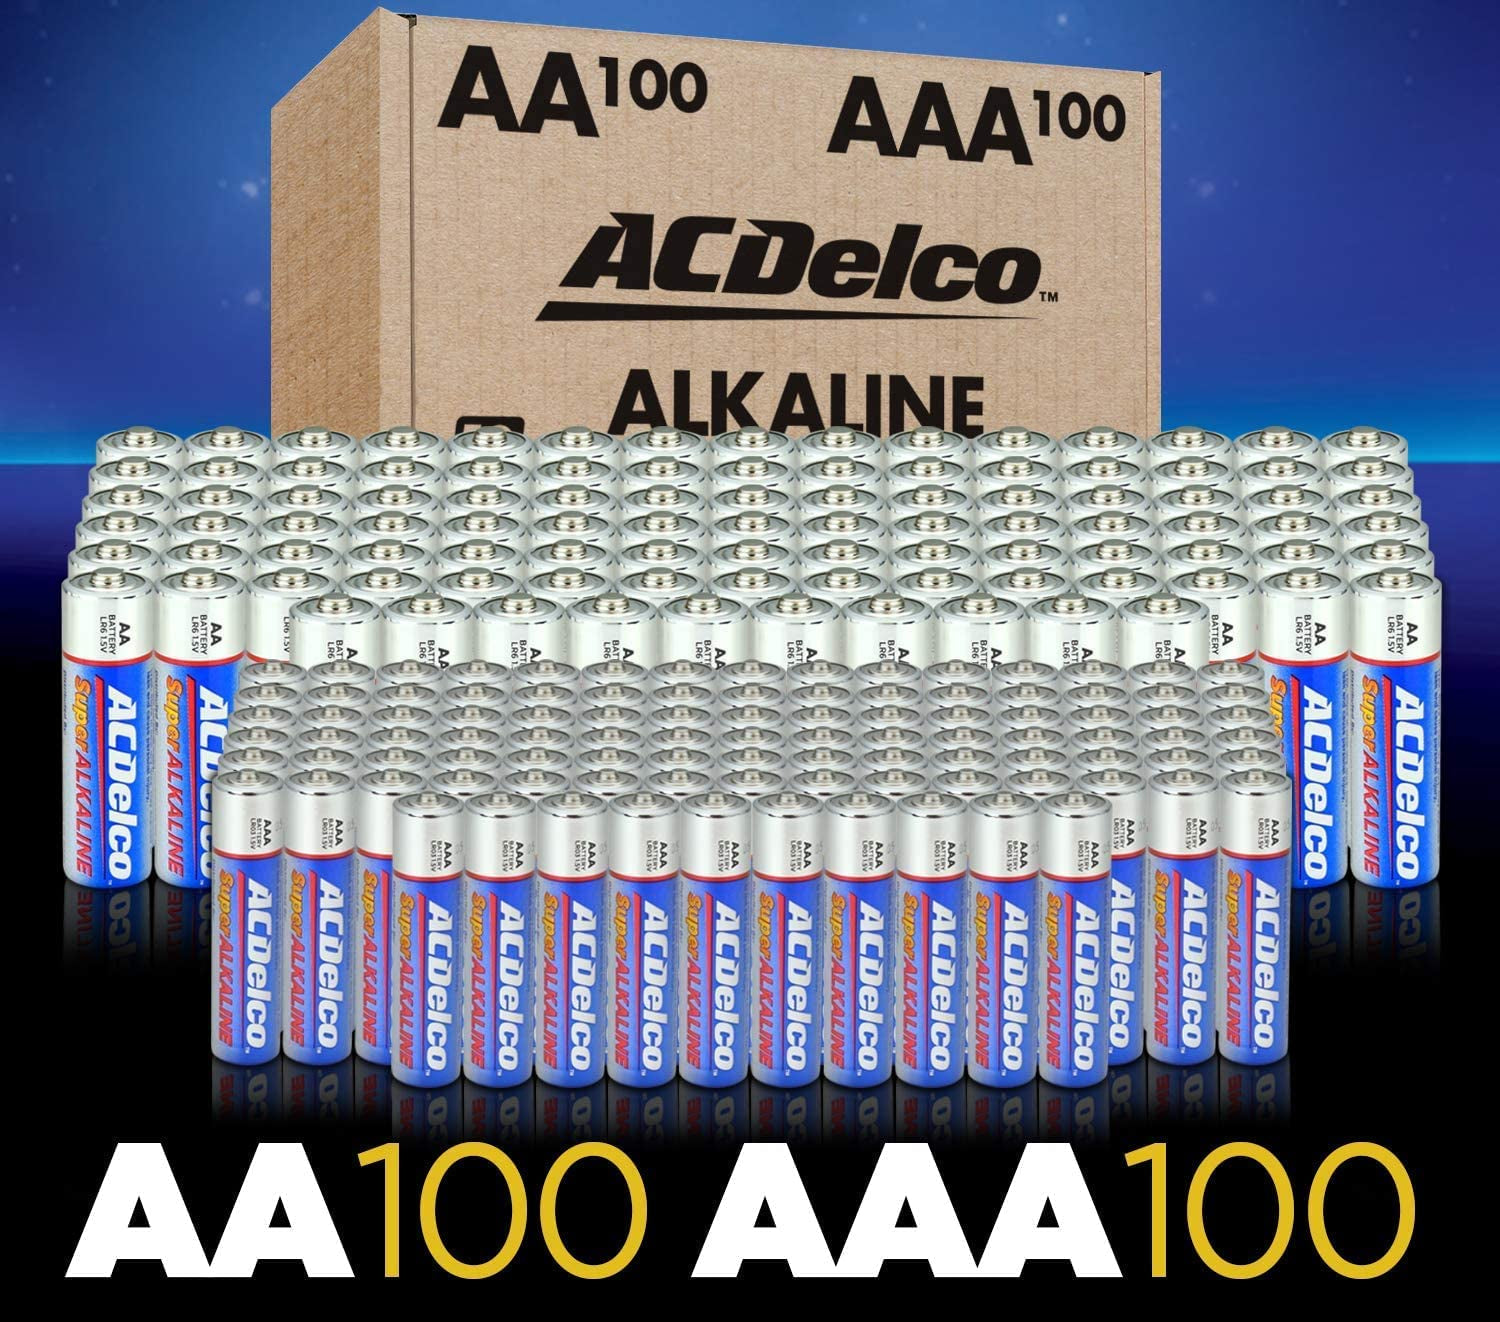 200-Count AA and AAACombo Pack Super Alkaline Batteries, 100-Count Each, 10-Year Shelf Life, Recloseable Packaging